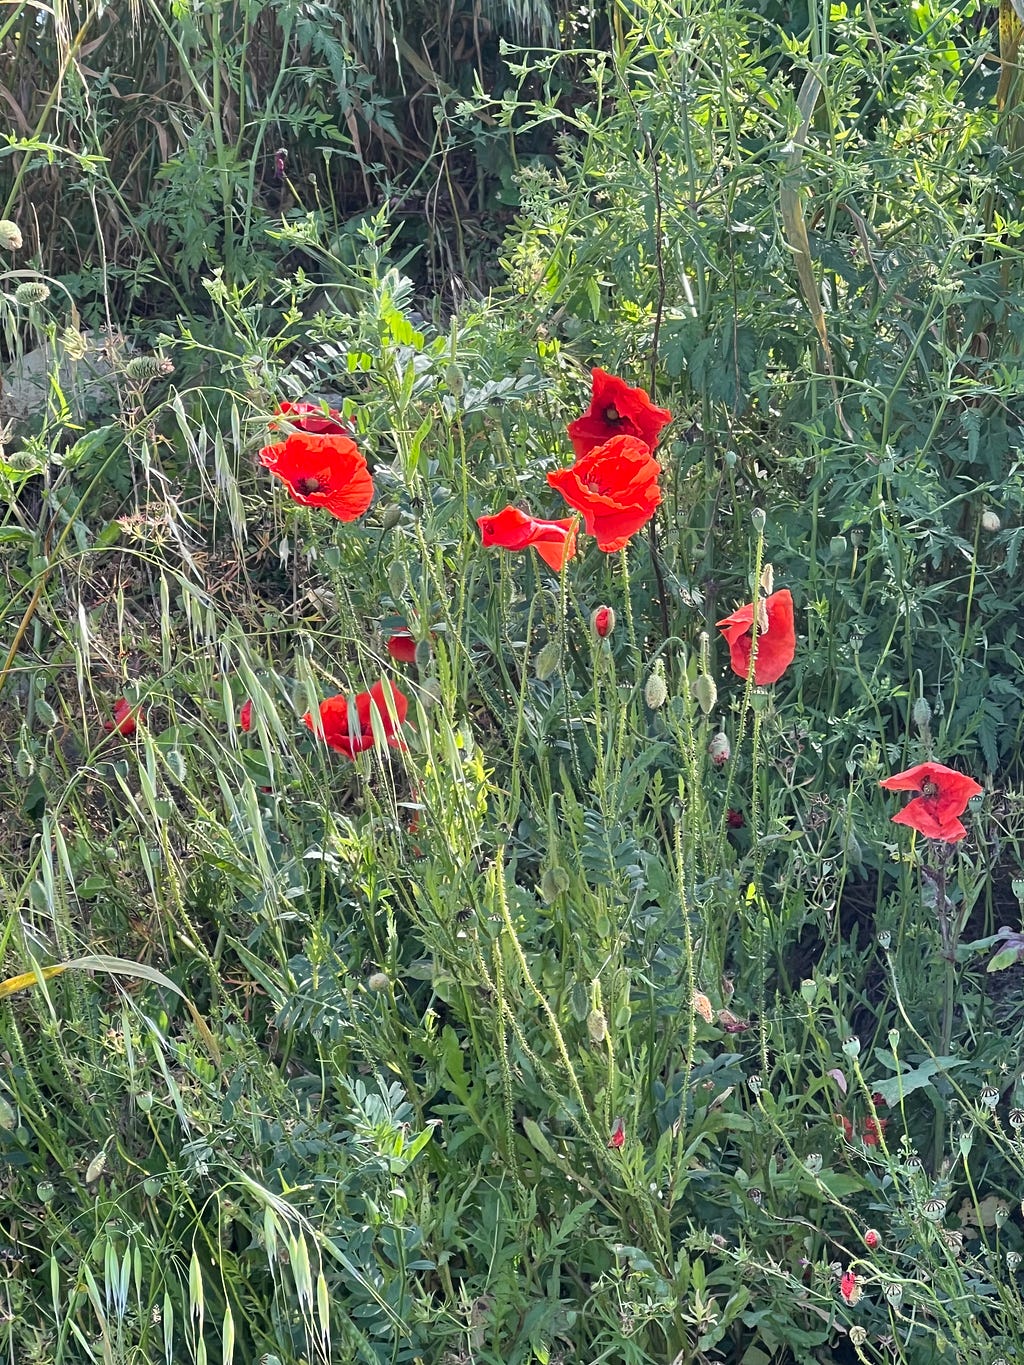 Scarlet poppy blooms, nodding seedheads, and soldier-straight wheat stalks disorder a roadside area.